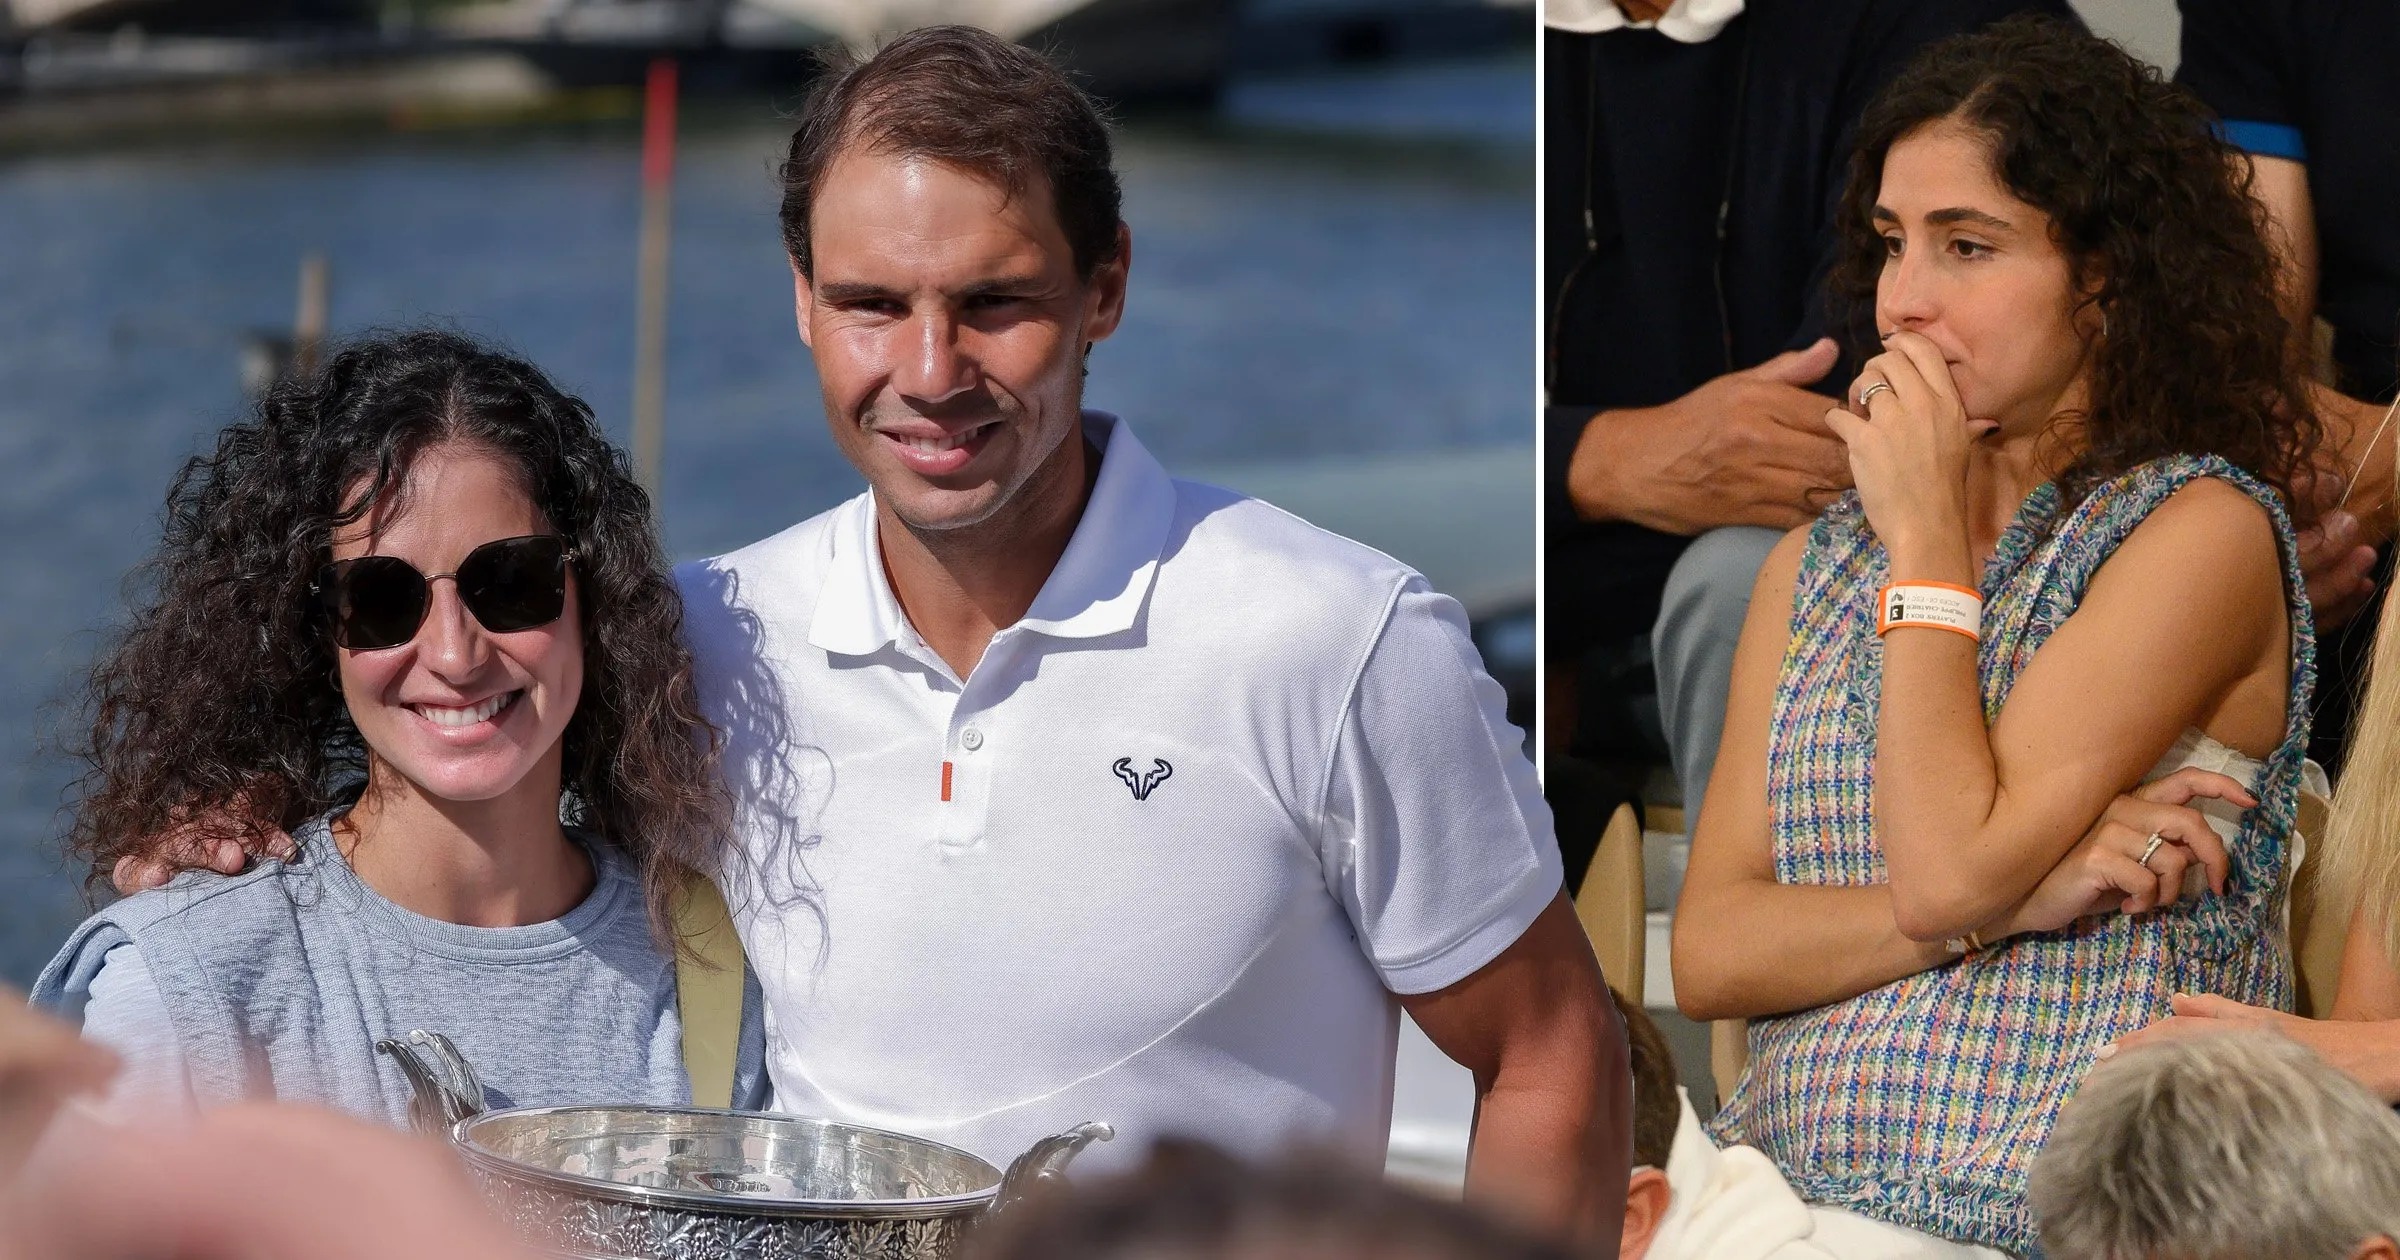 BREAKING NEWS: Rafael Nadal cried Out as his wife dead at 35 after cancer battle…